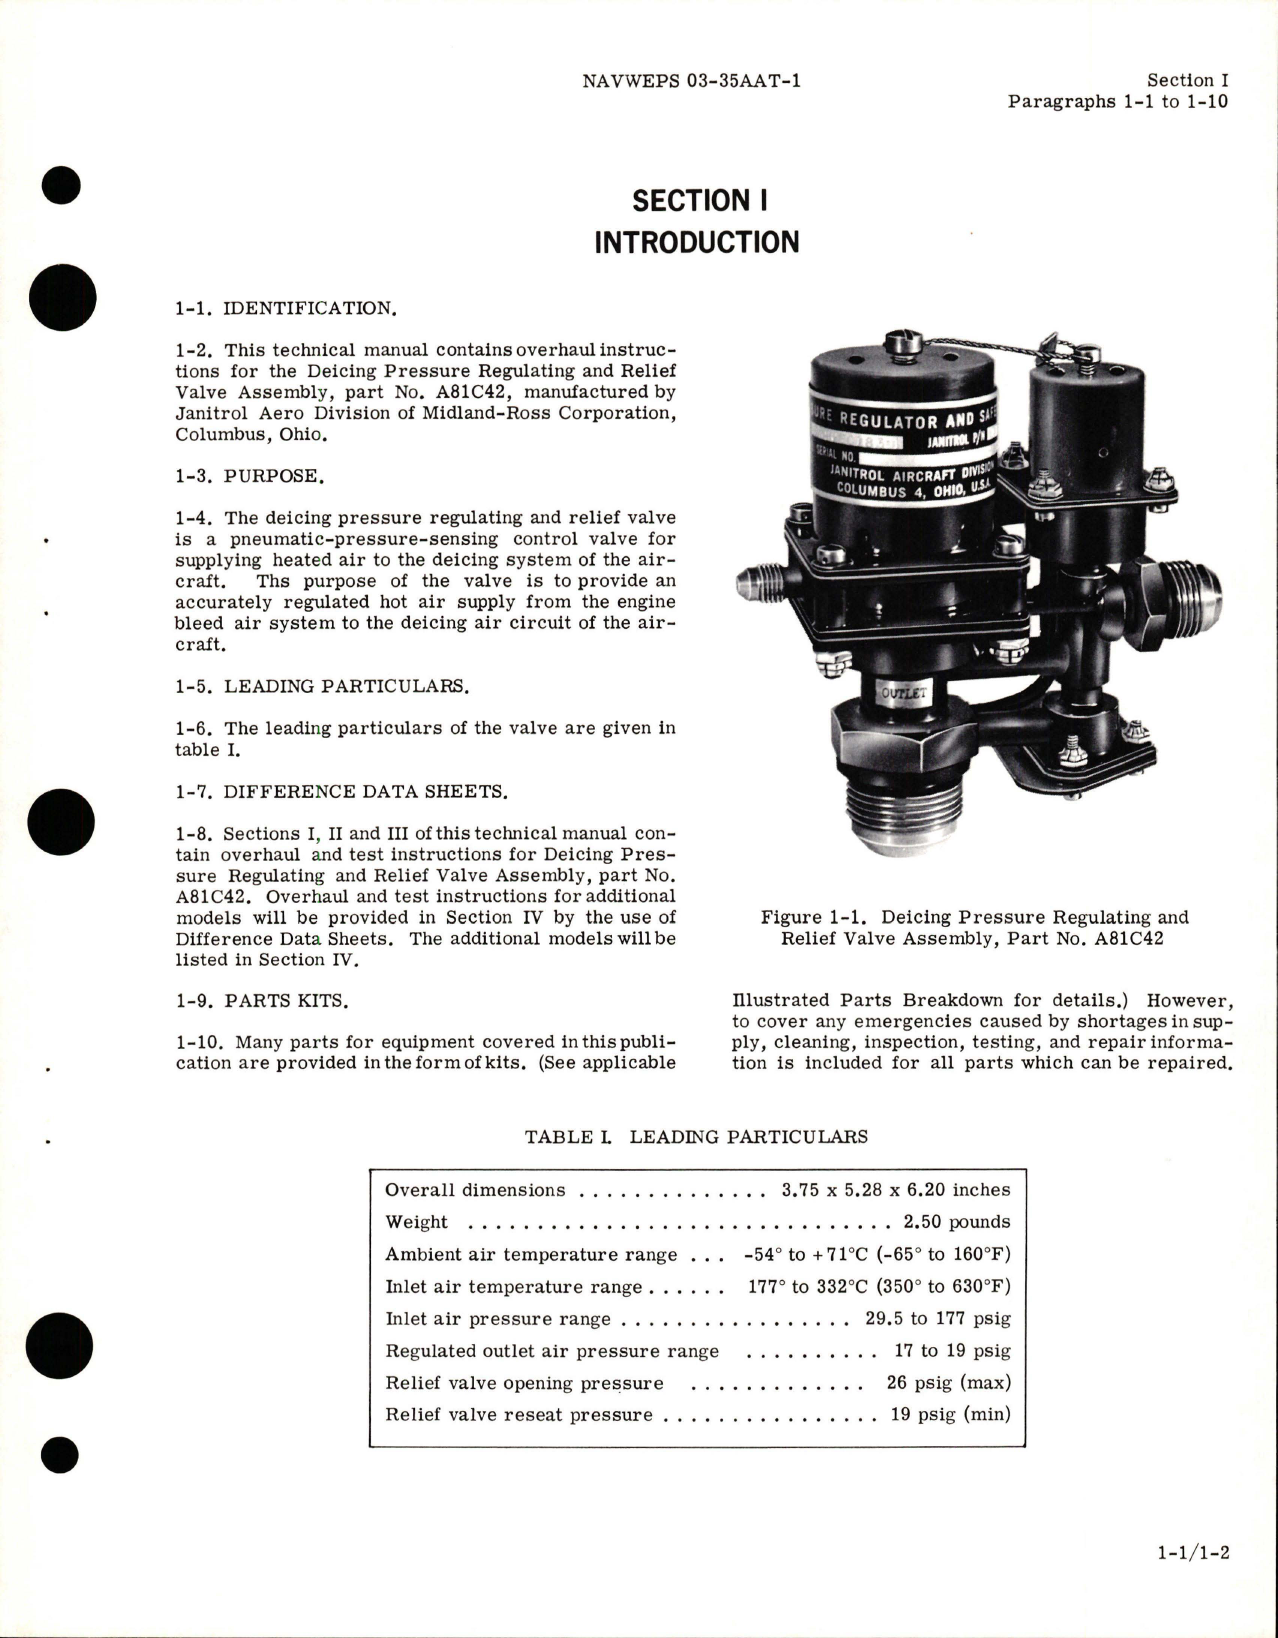 Sample page 5 from AirCorps Library document: Overhaul Instructions for Deicing Pressure Regulating & Relief Valve Assembly - Part A81C42